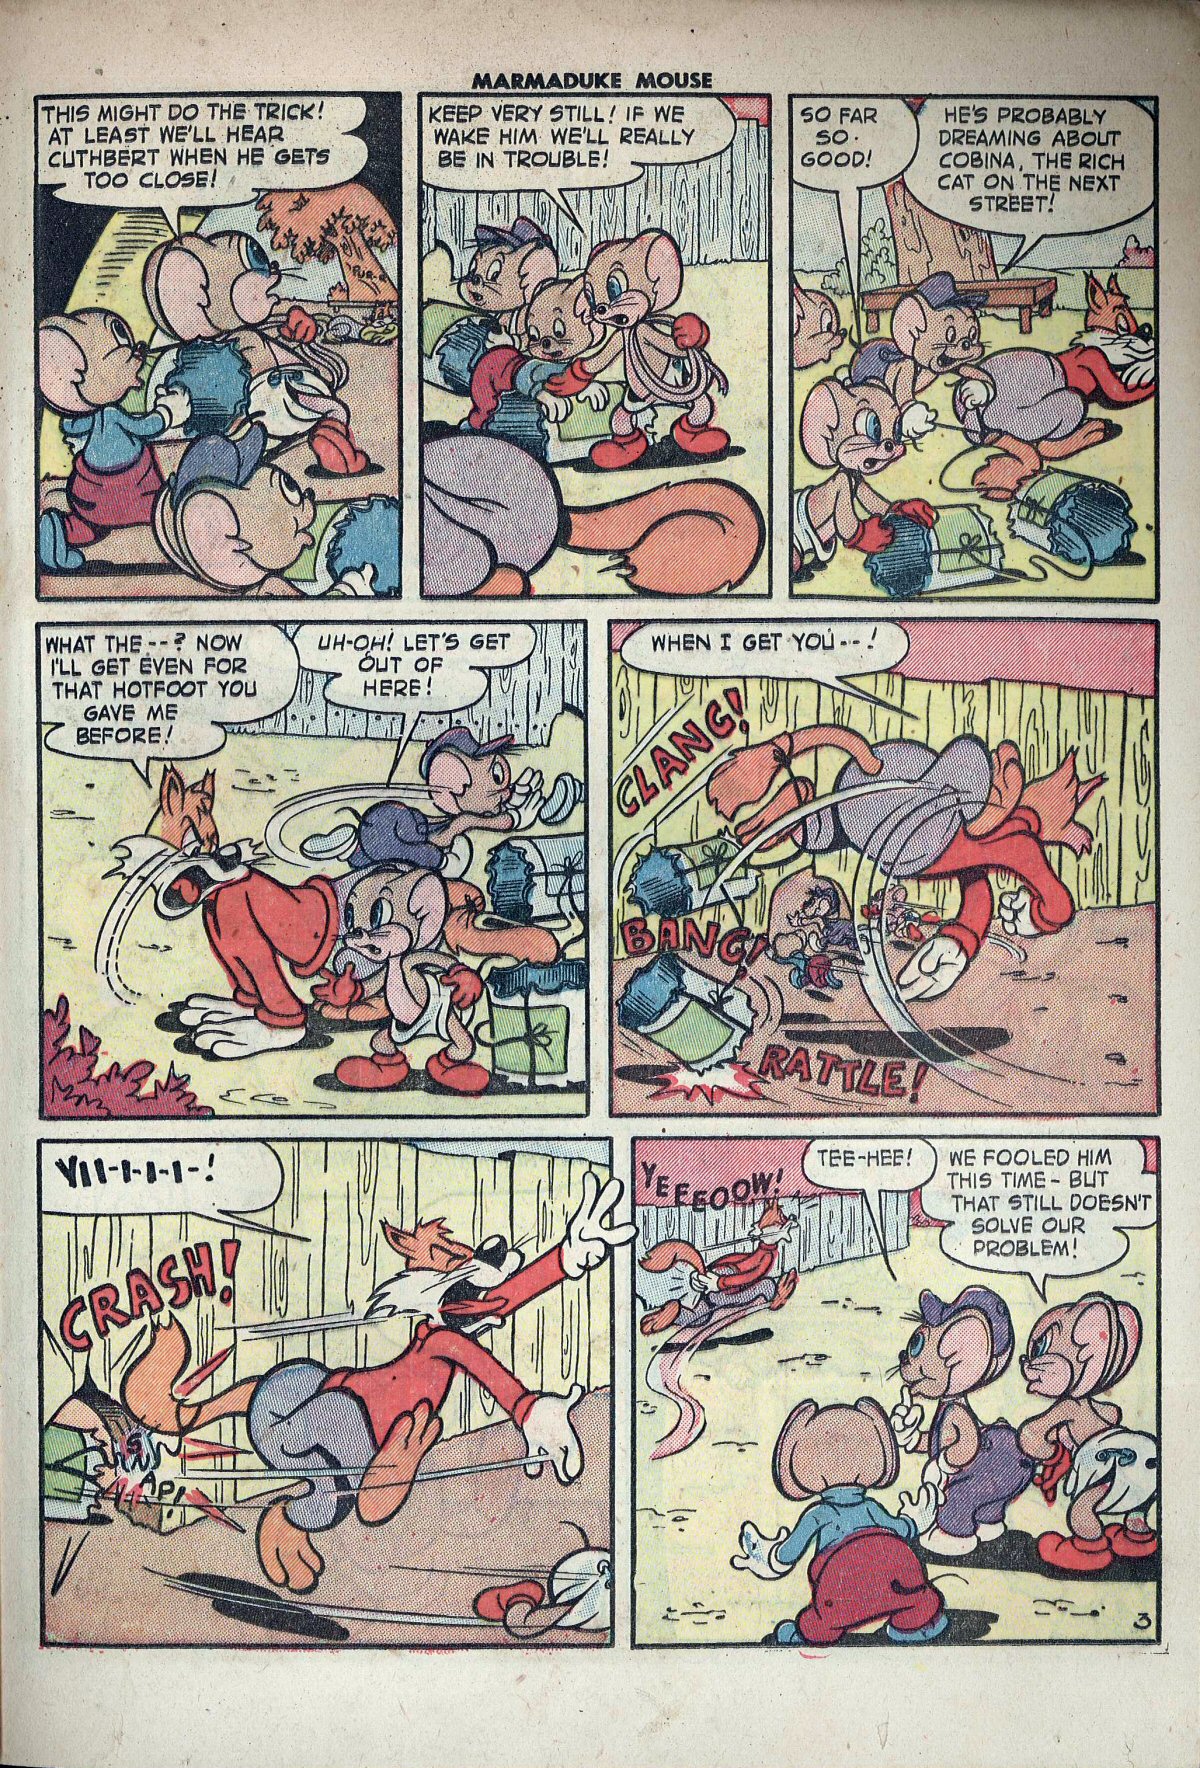 Read online Marmaduke Mouse comic -  Issue #39 - 21